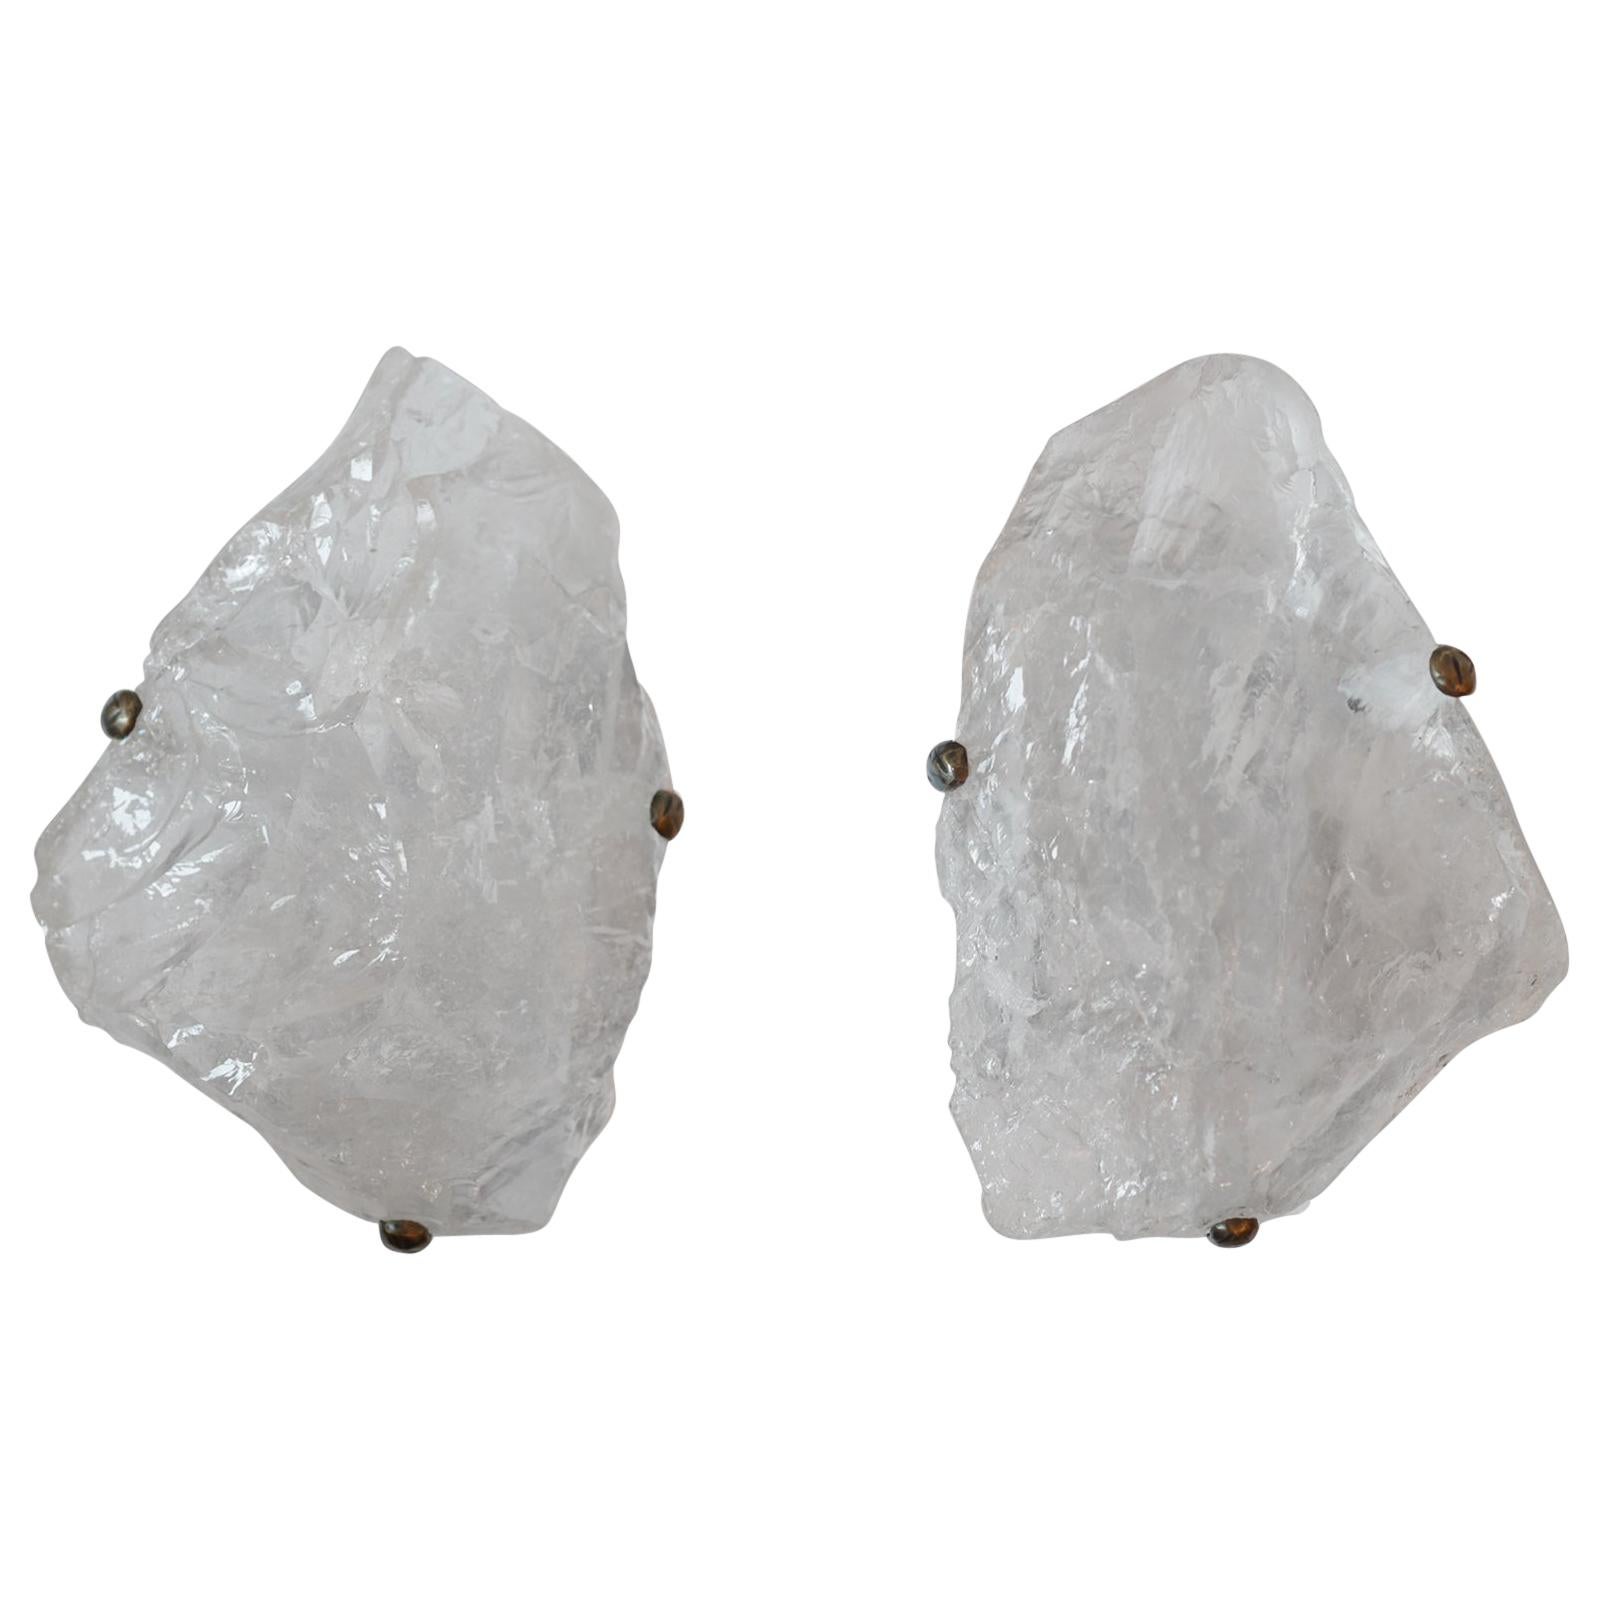 Natural Rock Crystal Sconces by Phoenix